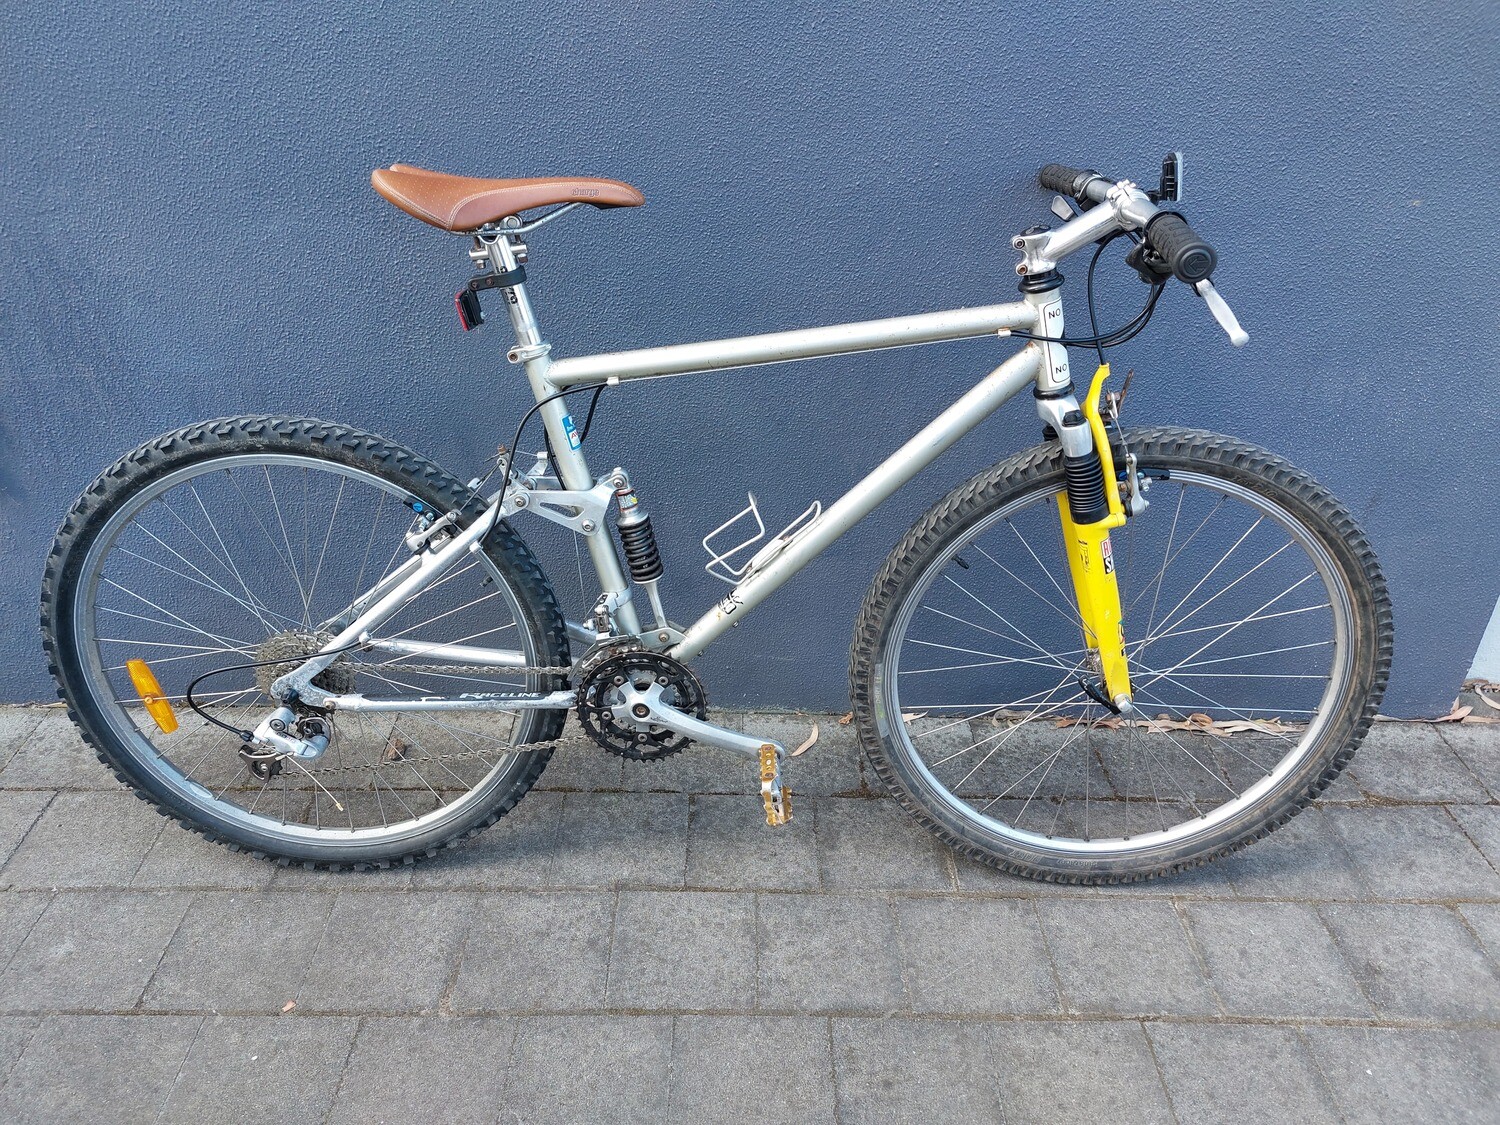 S - Classic Mountain Bike with a beautiful but slightly rusted chromoly frame